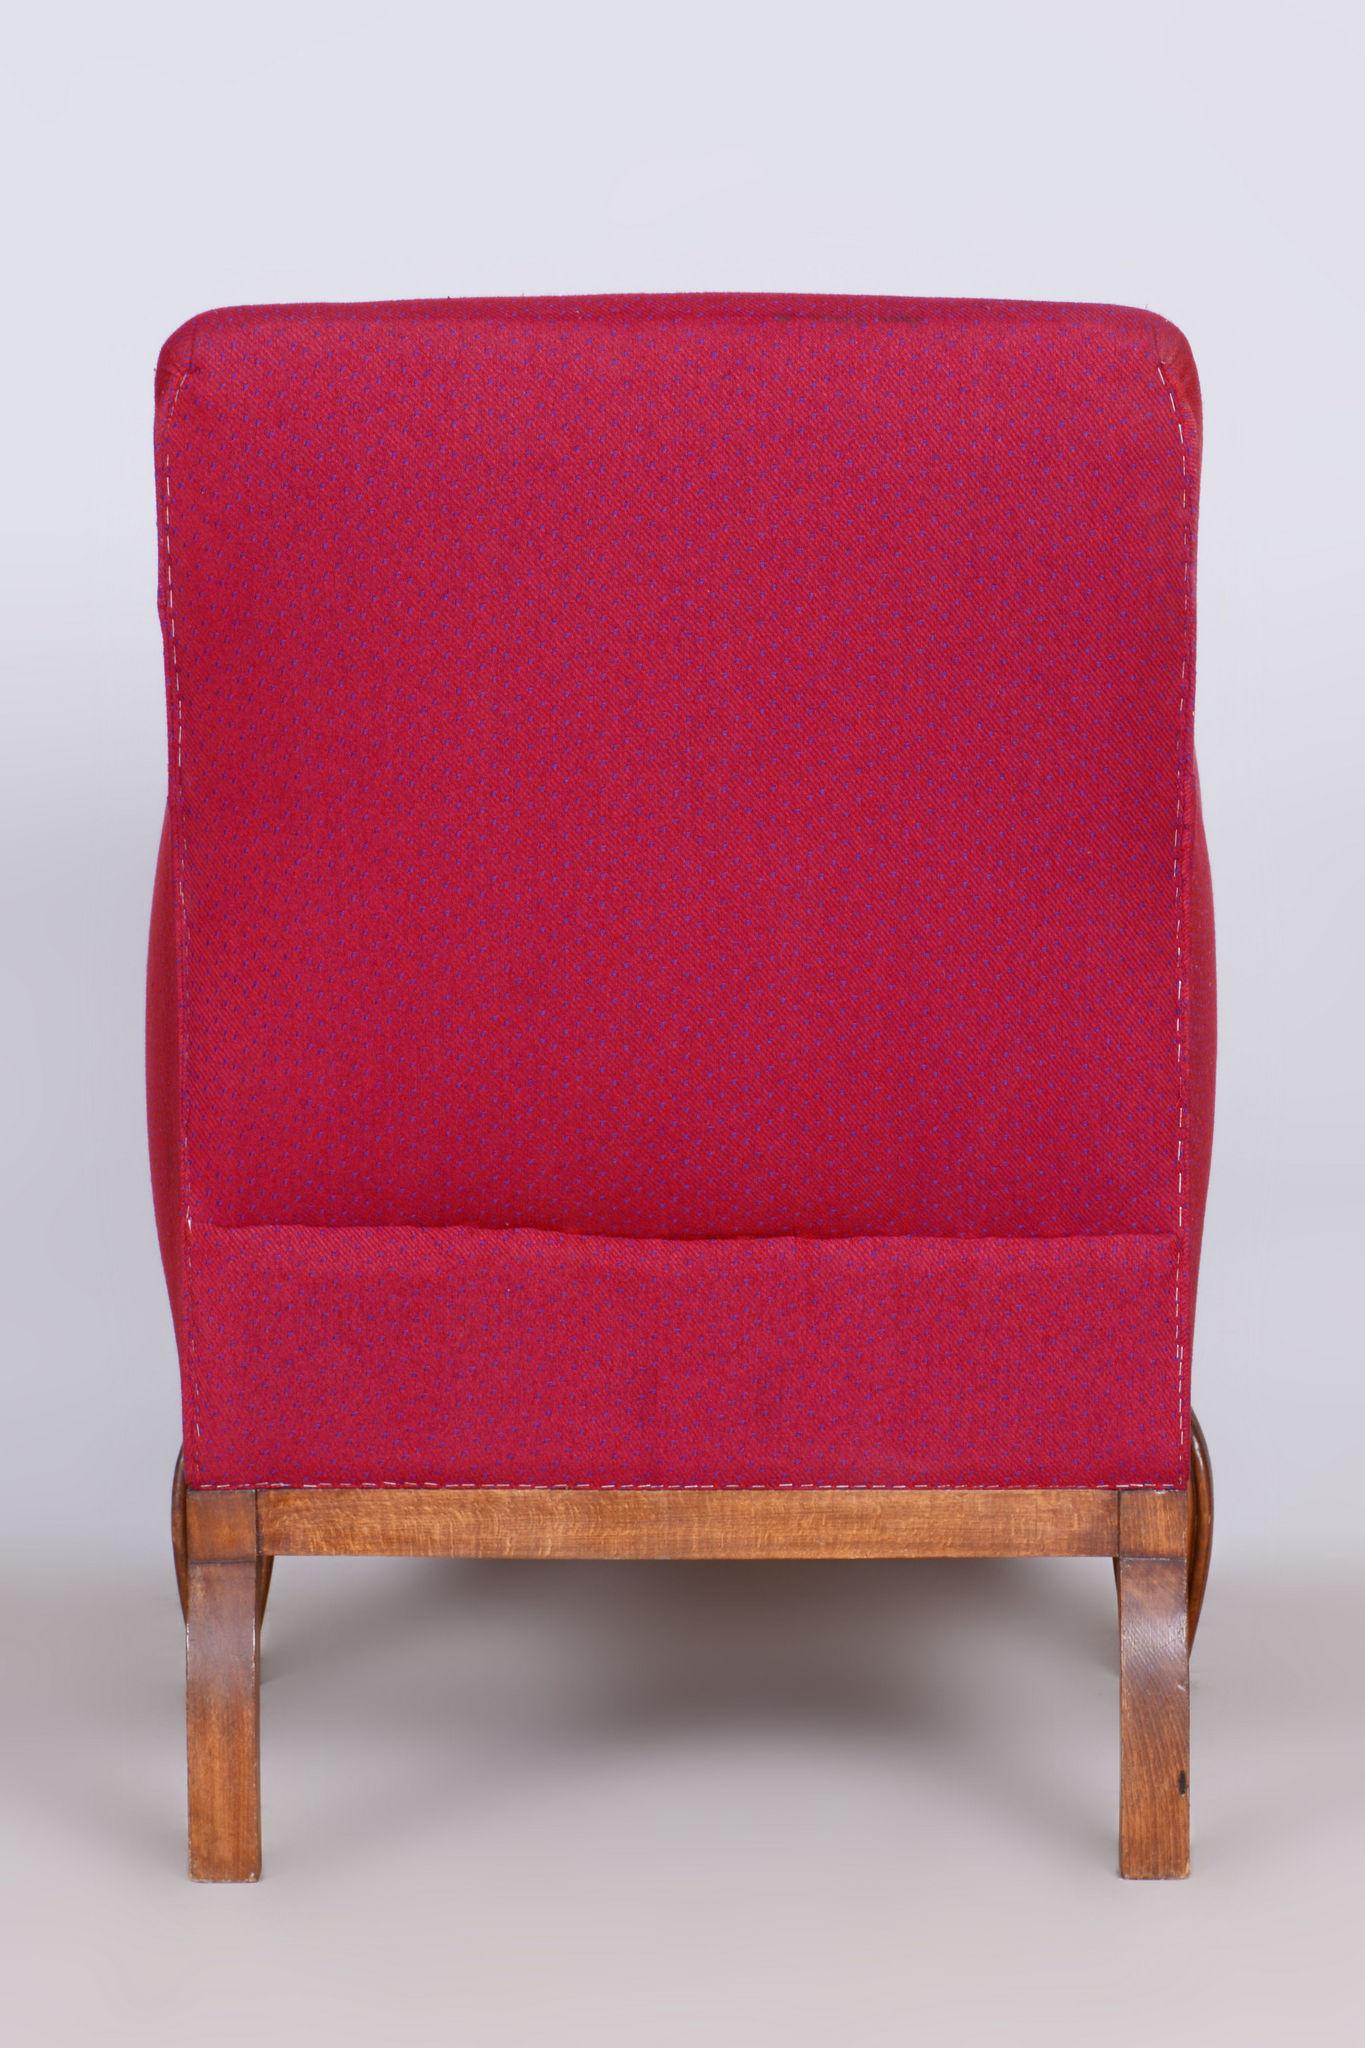 Restored Art Deco Red Armchair, Beech, Original Upholstery, France, 1930s For Sale 4